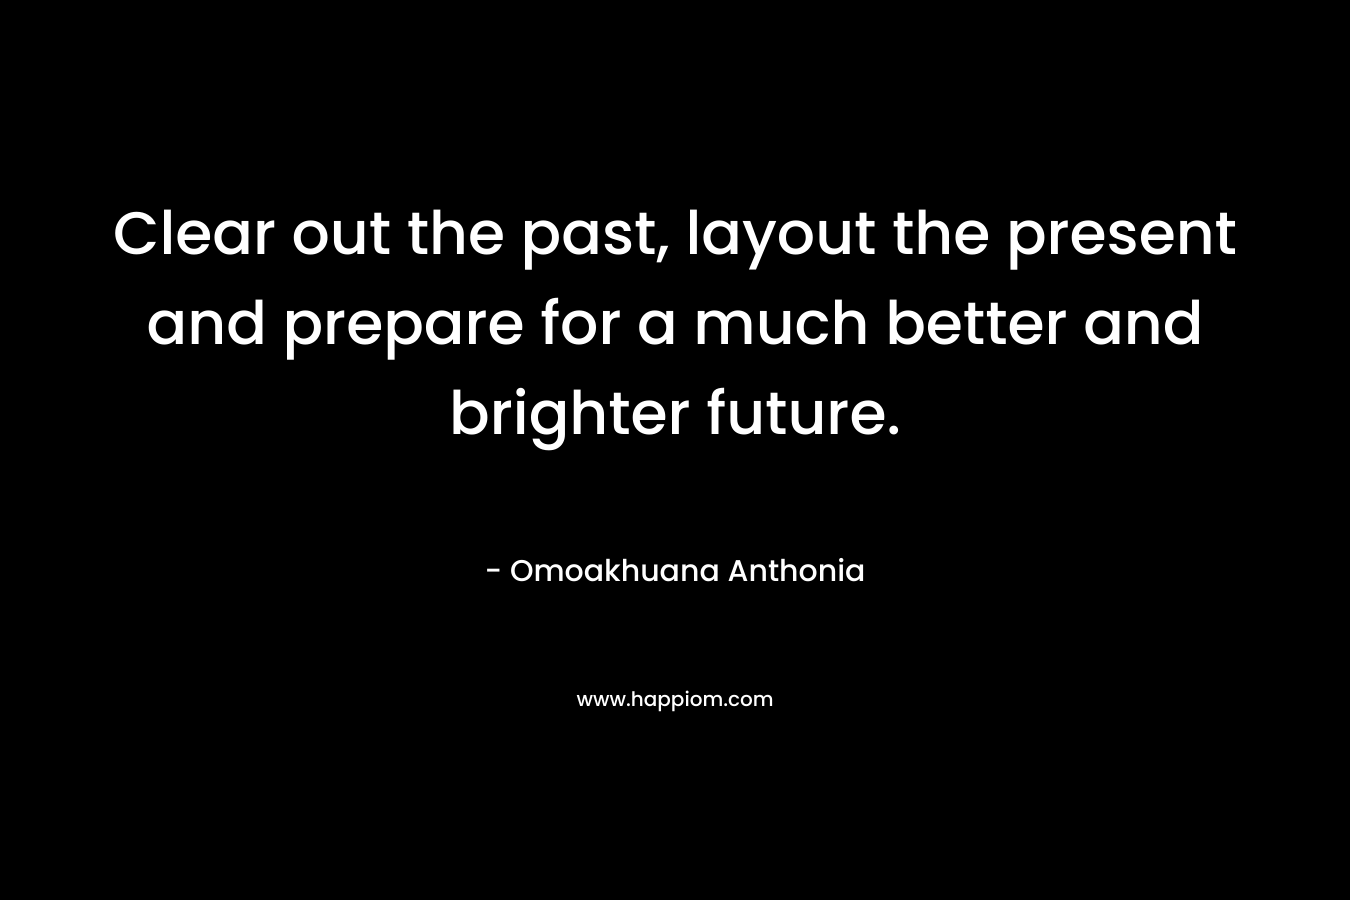 Clear out the past, layout the present and prepare for a much better and brighter future.